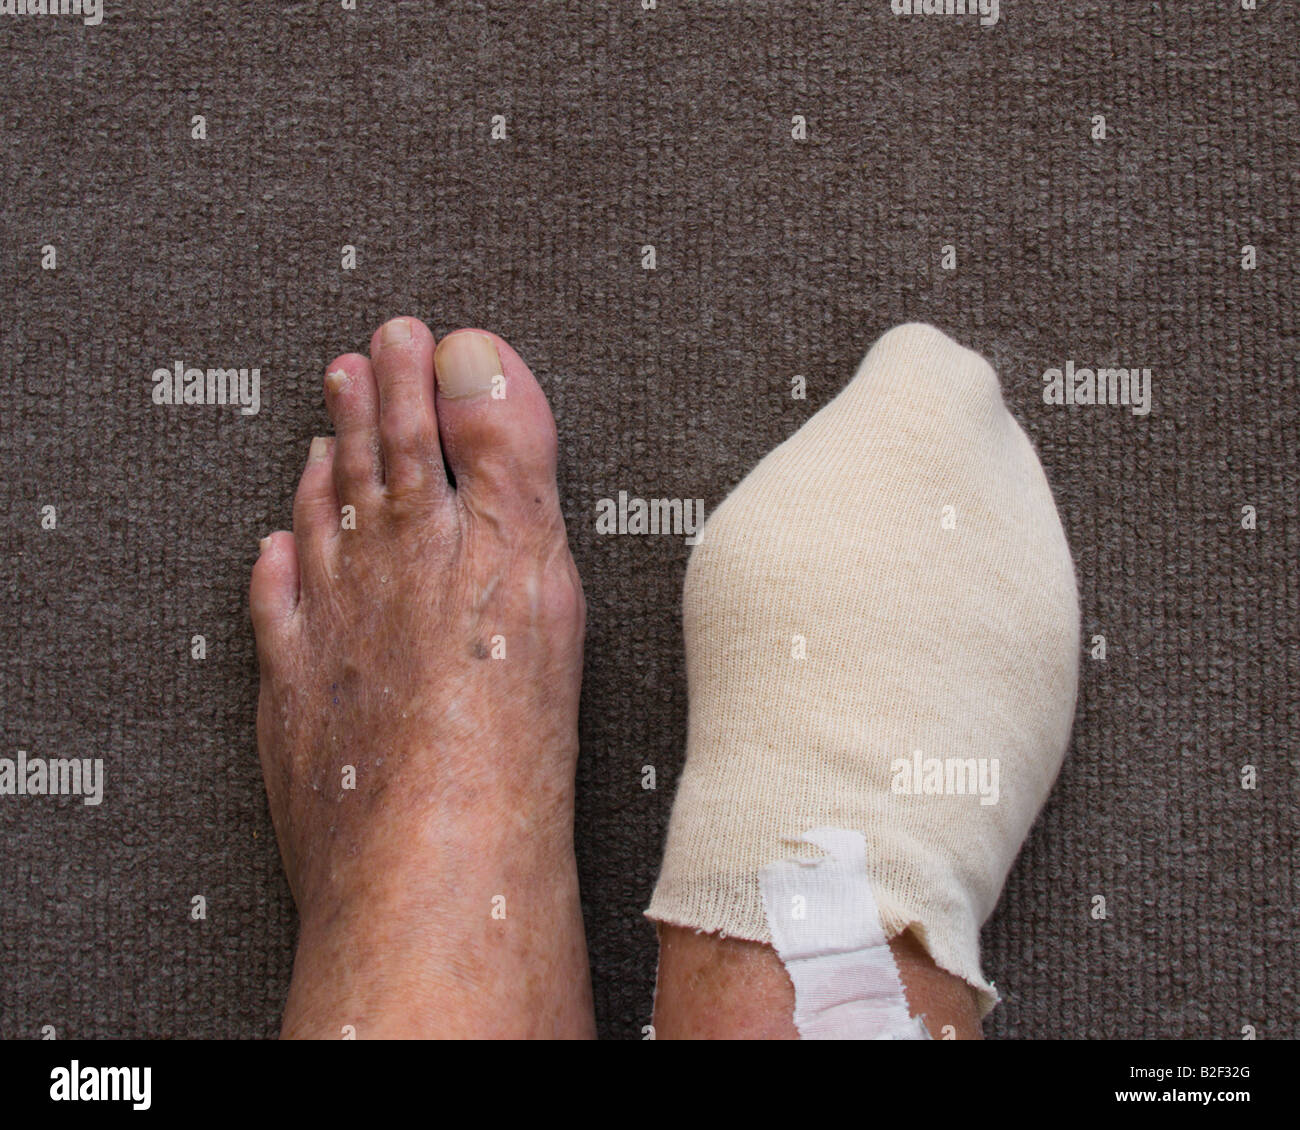 DIABETIC NEUROPATHY RESULTED IN AN INFECTION WHICH CAUSED THE AMPUTATION OF THE RIGHT BIG TOE OF THIS PATIENT Stock Photo